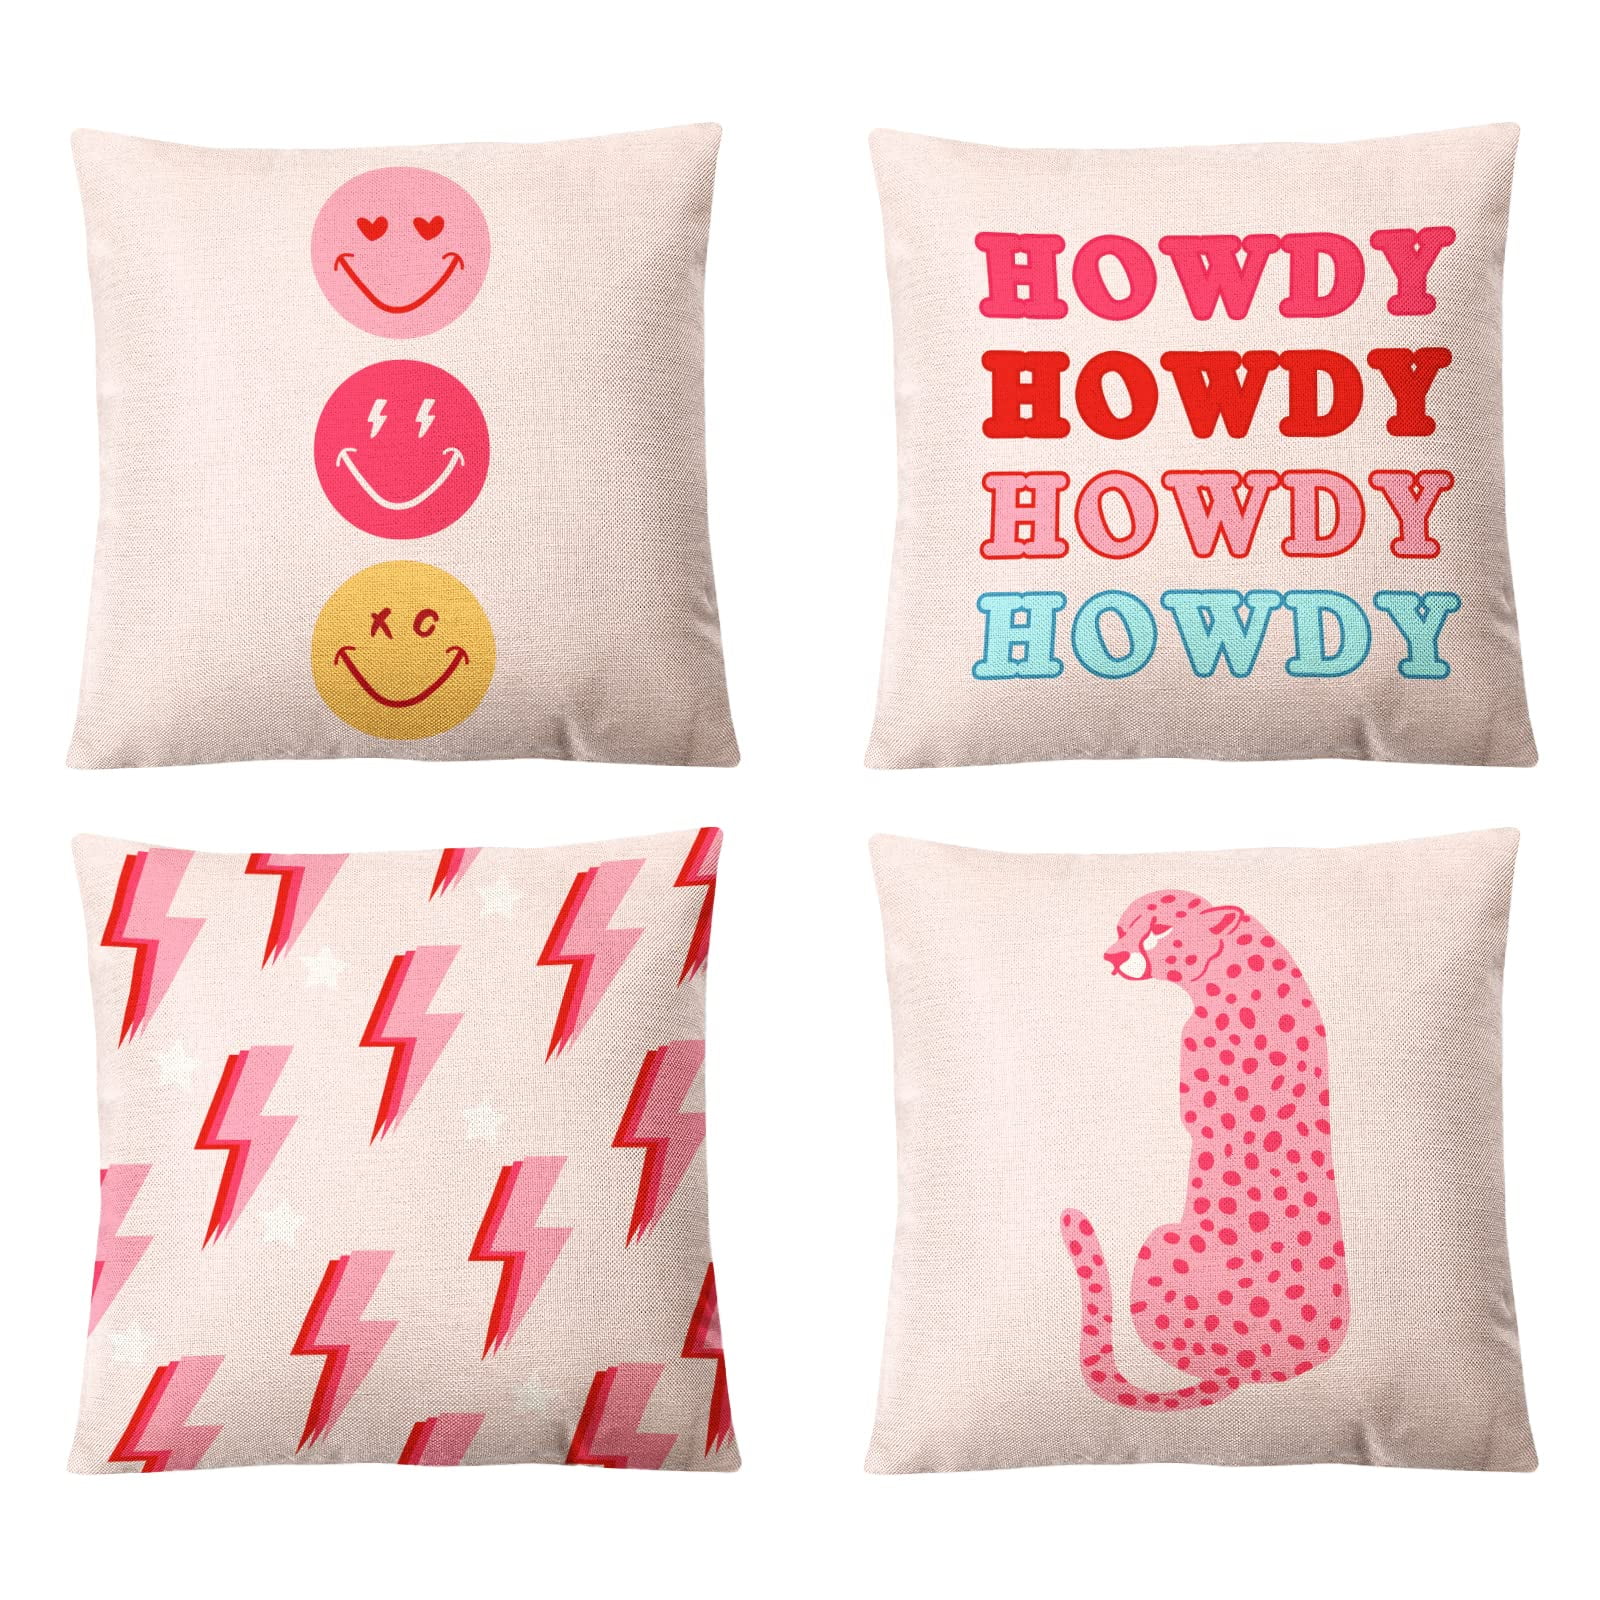  FLDAS Hot Pink Preppy Cowgirl Boots Howdy Decorative Reversible  Throw Pillow Covers 18×18 Inch, Western Cowgirls Pillow Cases Cushion for  Girls Room College Bedroom, Trendy Gifts for Women Teen Girls 